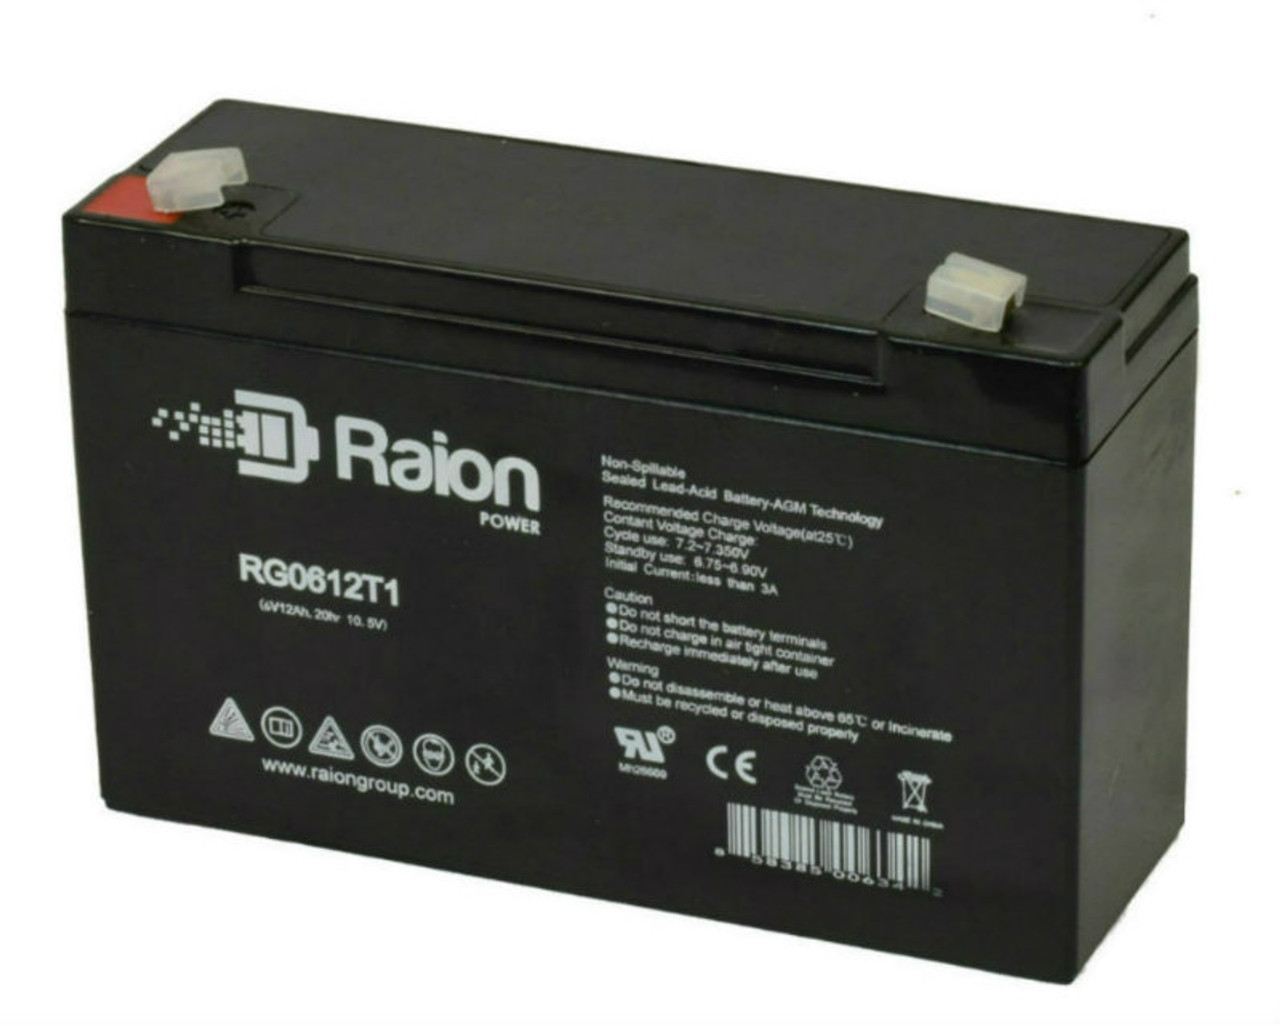 Raion Power RG06120T1 Replacement Battery for Johnson Controls GC1290